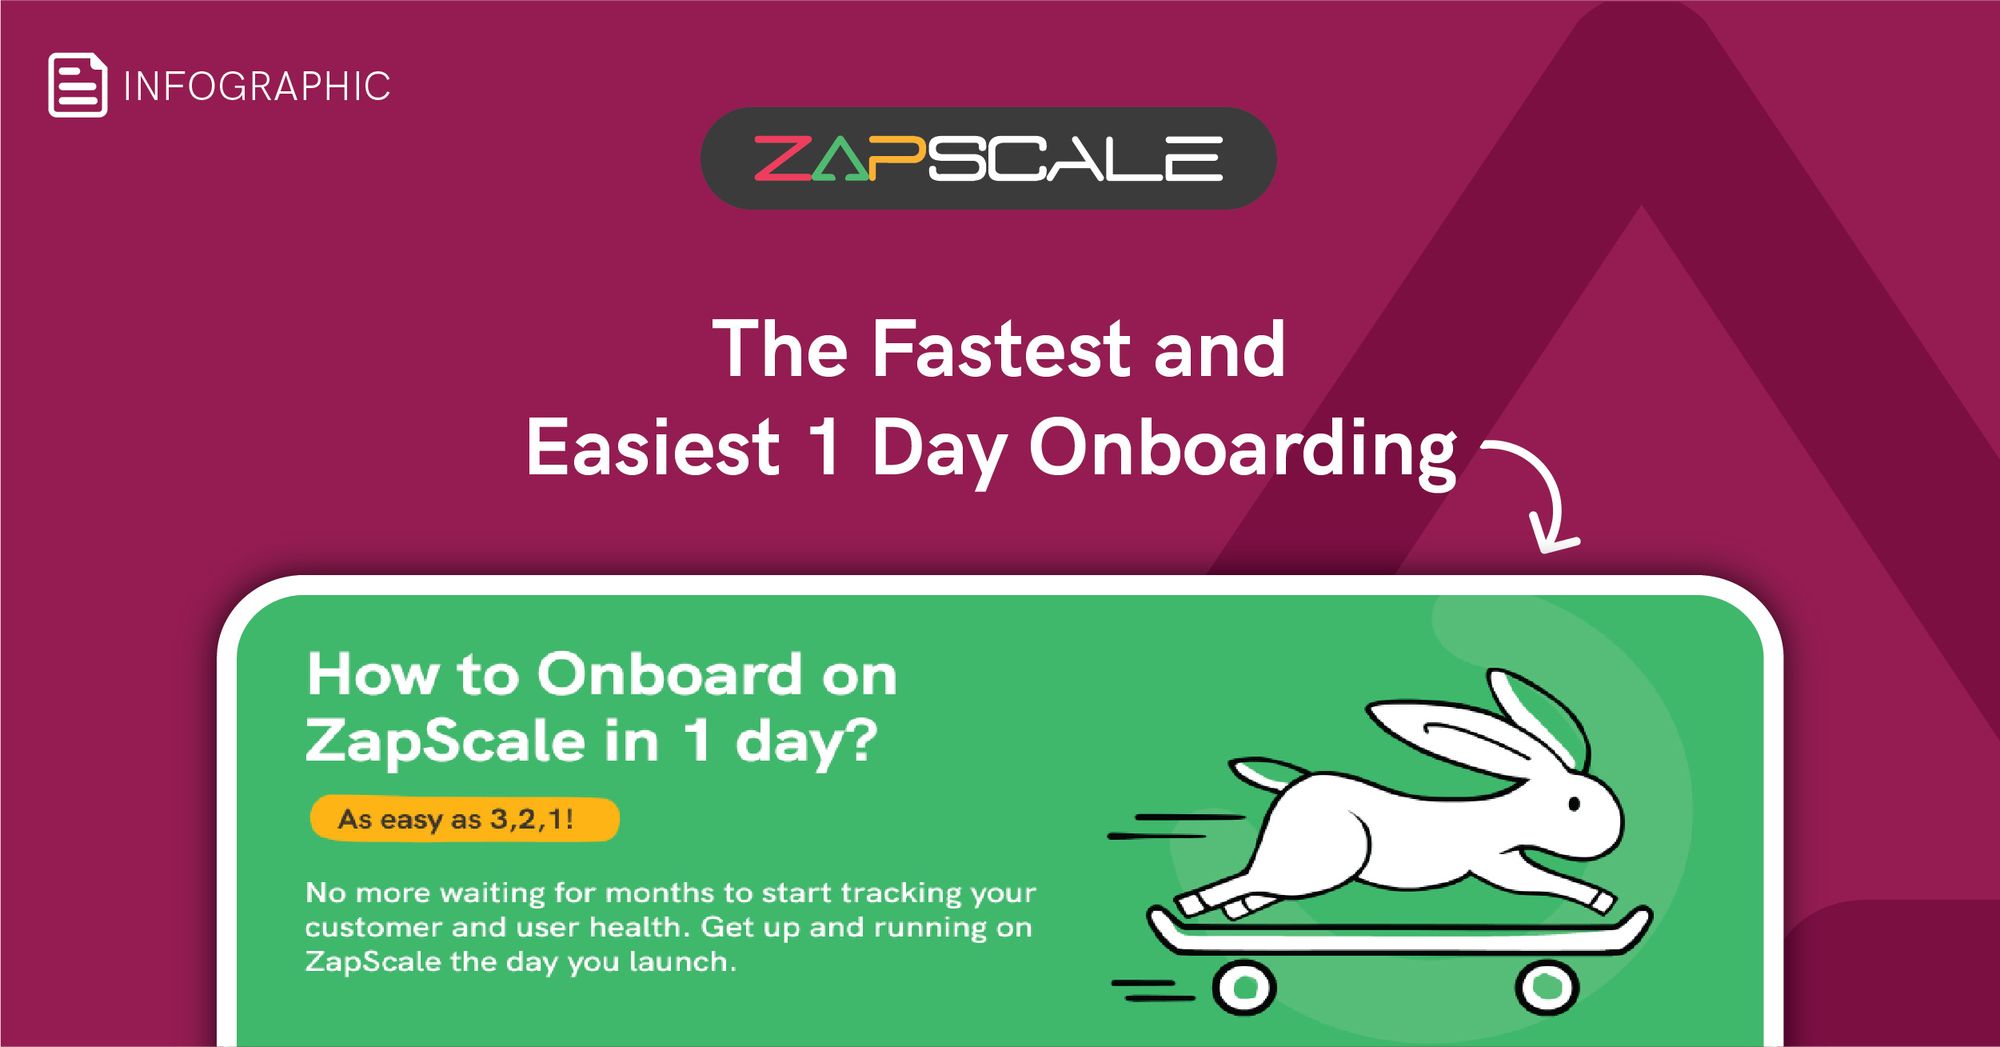 How to Onboard on ZapScale in 1 day?